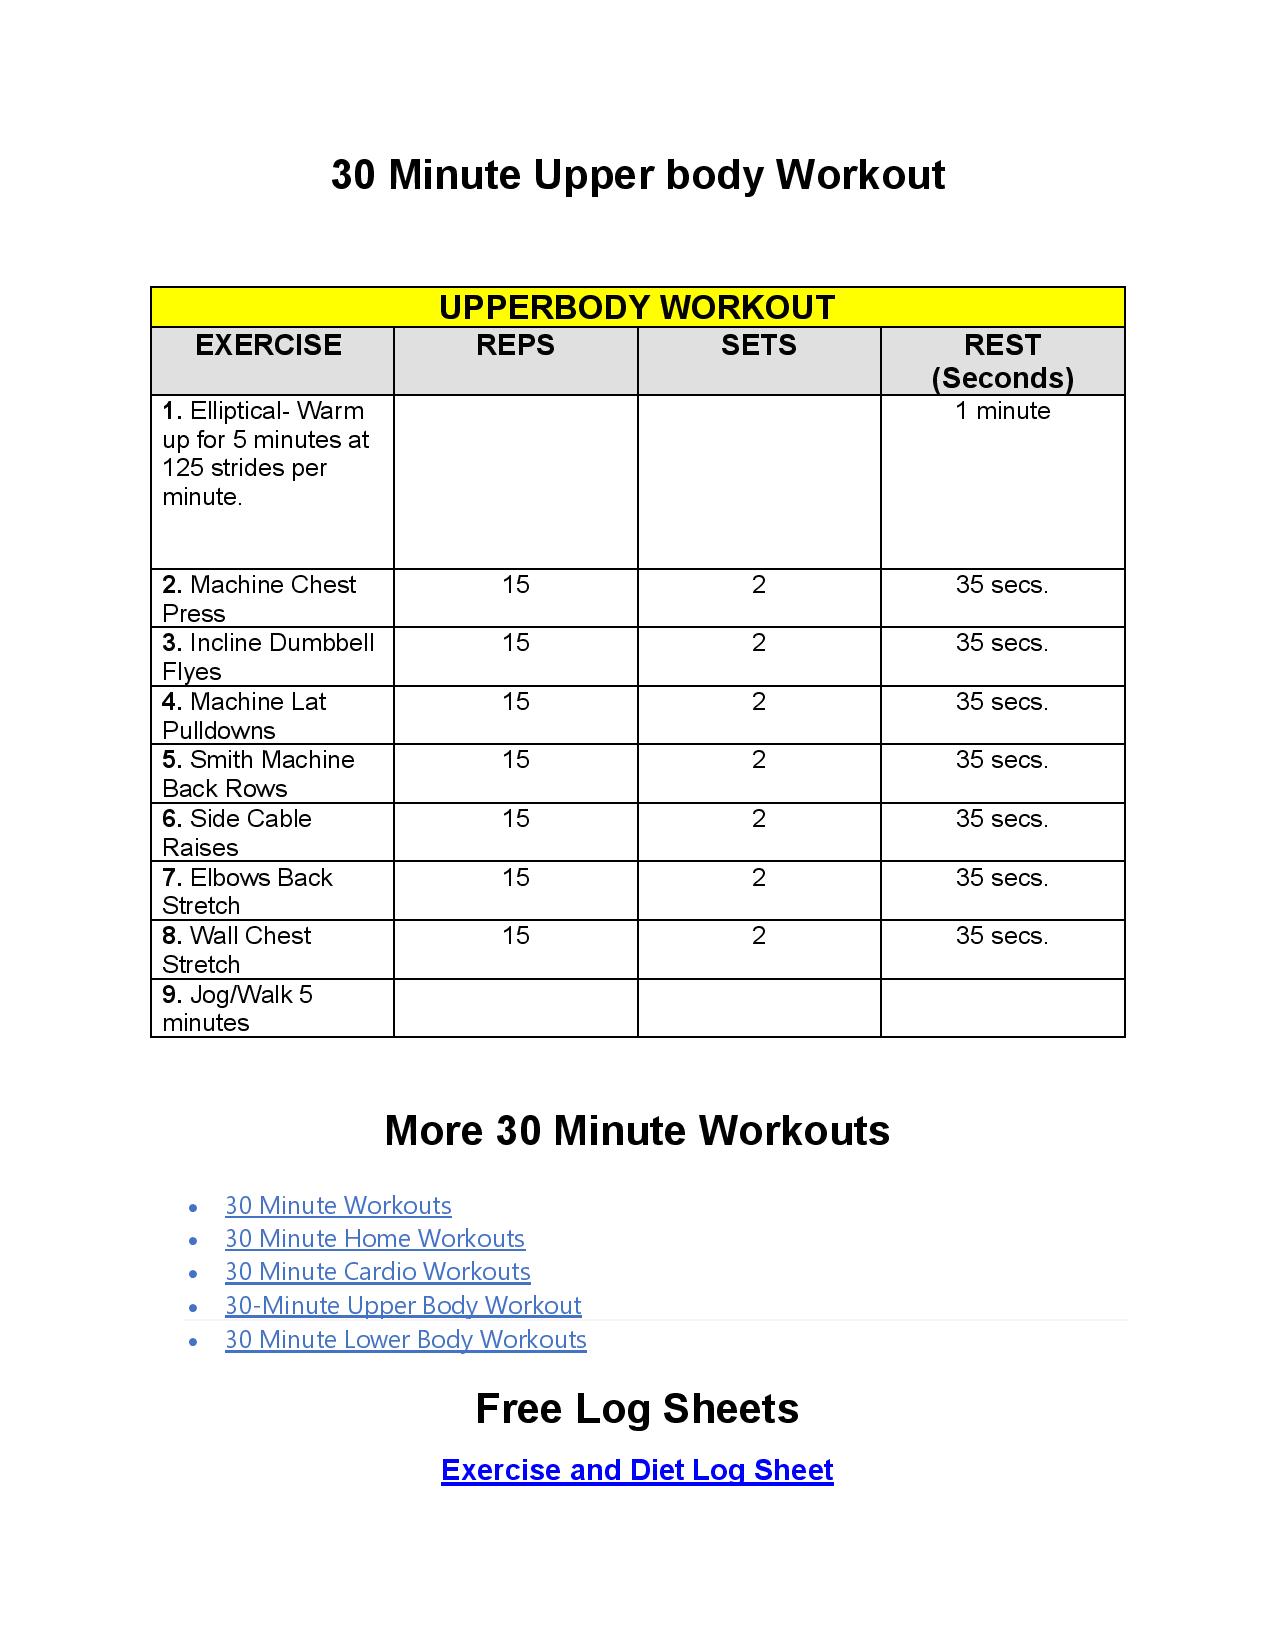 30 minute upper body sample workout pdf.